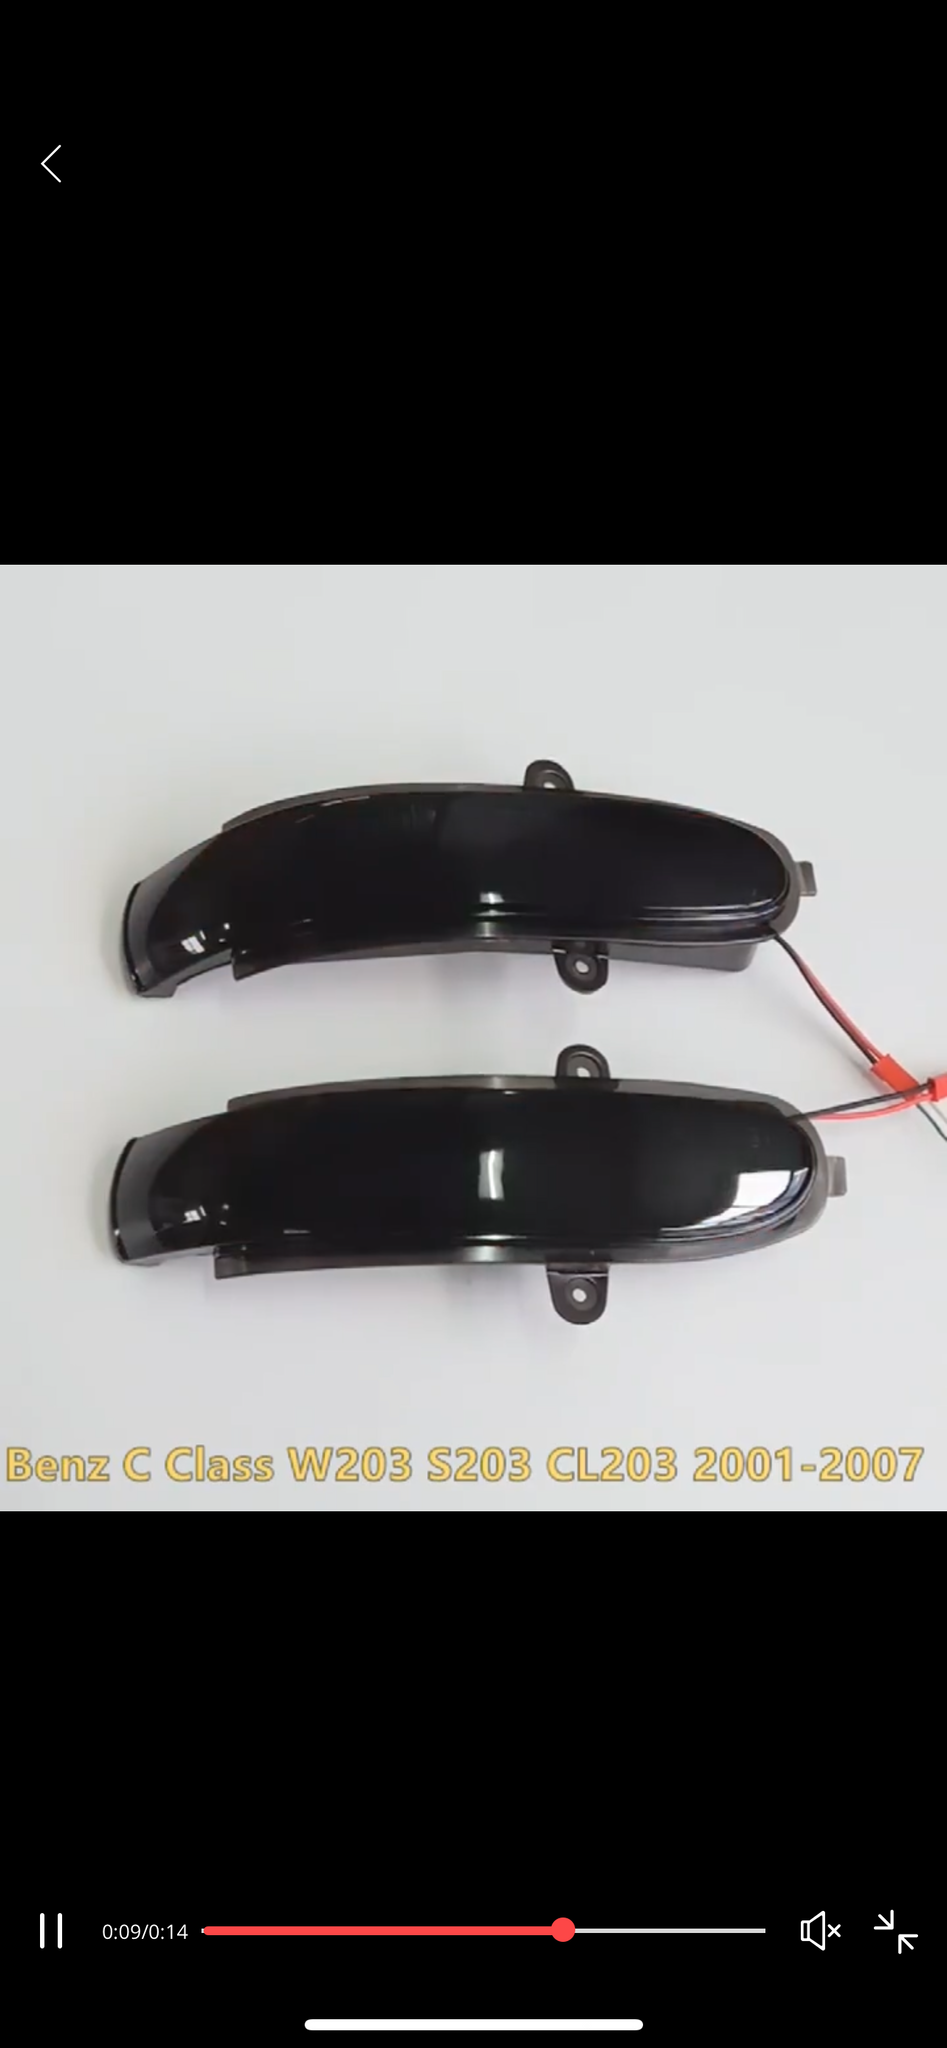 Dynamic Indicator Blinker Suit For Mercedes Benz C Class W203 S203 CL203 2001-2007 LED Turn Signal Side Mirror Light